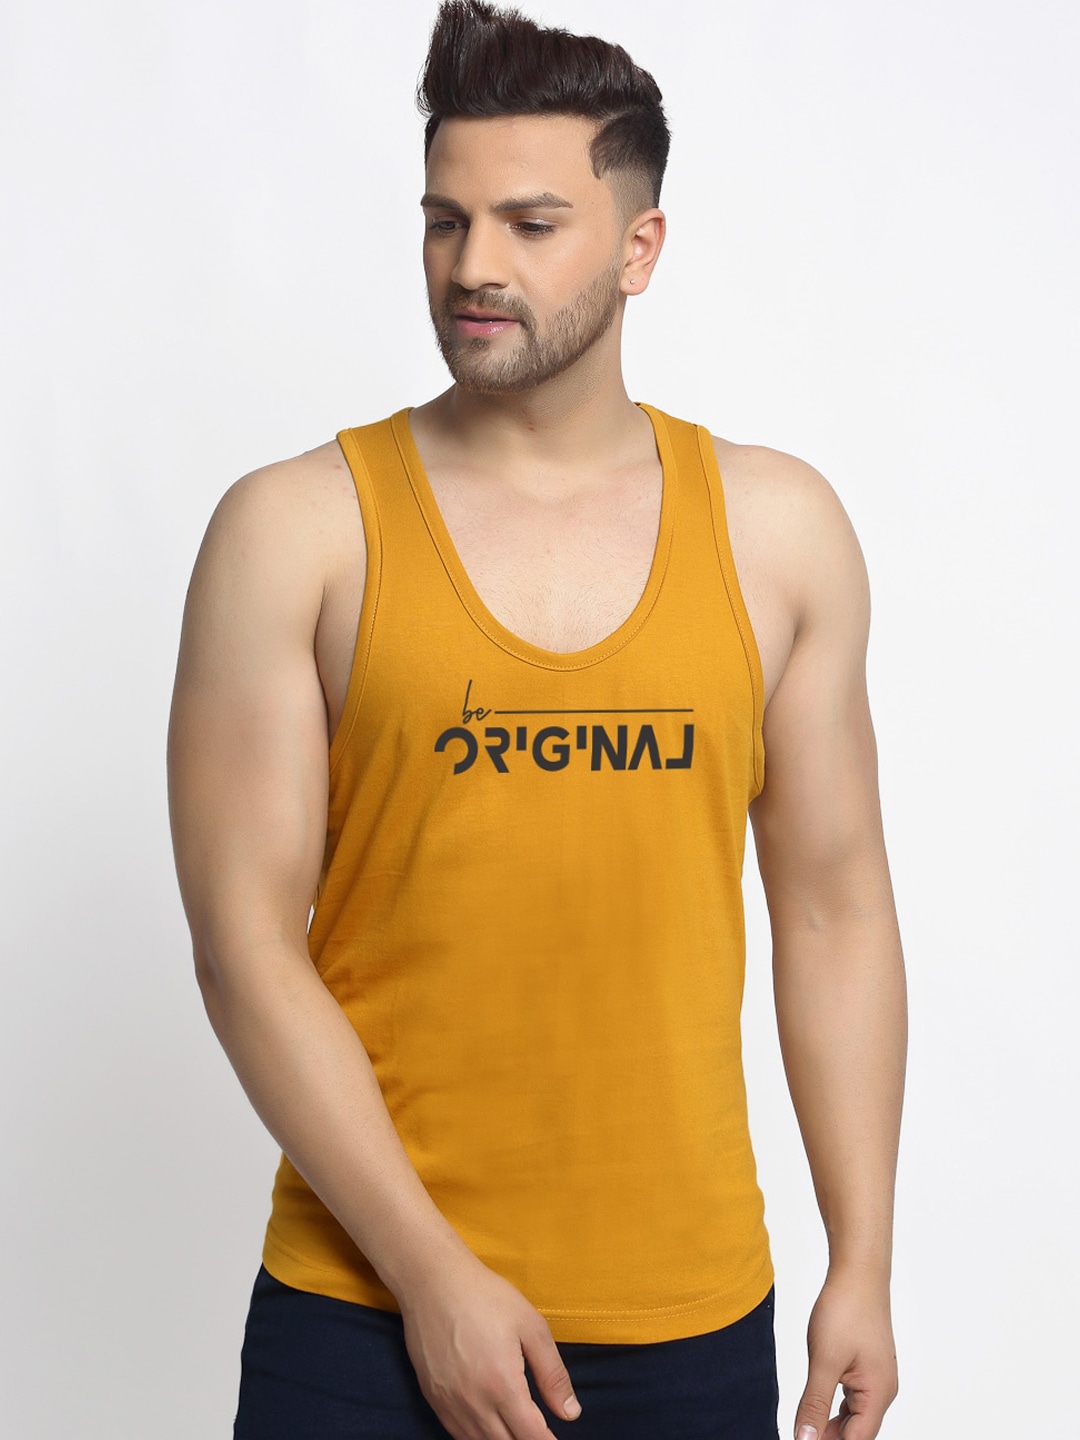 Clothing Innerwear Vests | Friskers Men Gold Printed Pure Cotton Innerwear Vest C107-26-S - FH58581